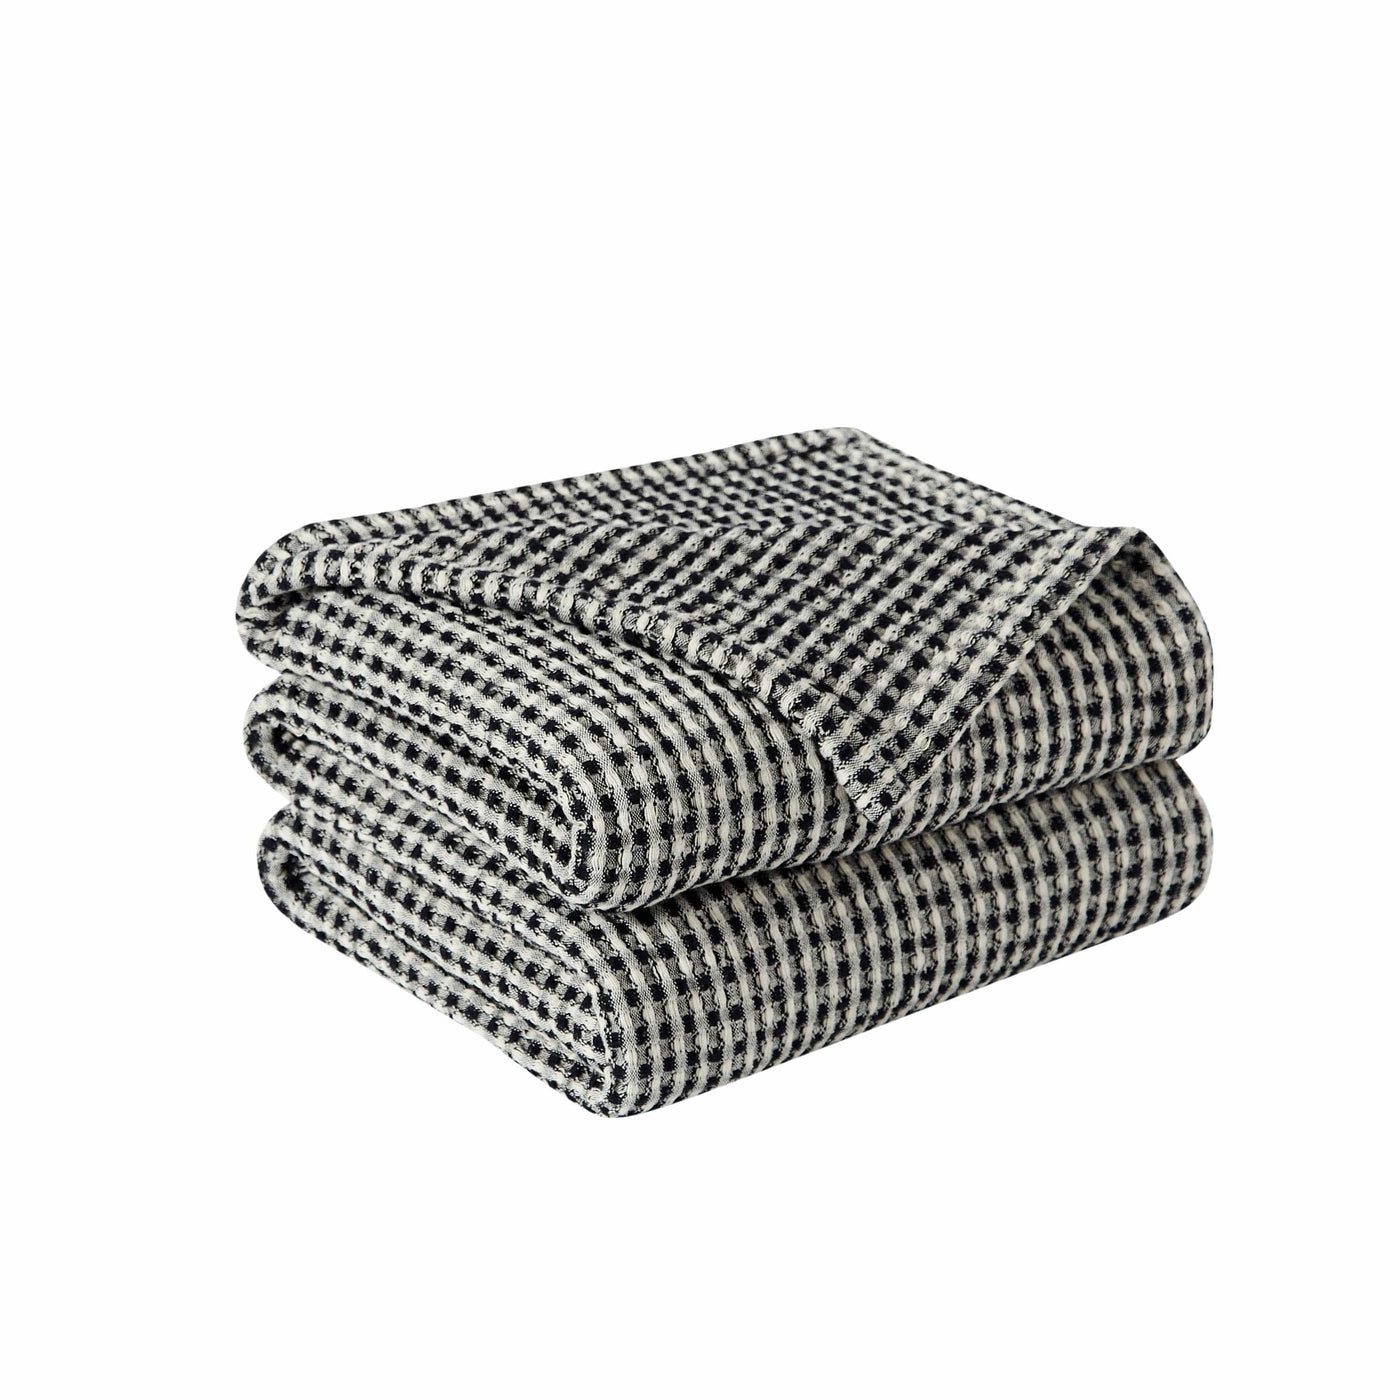 Details of Tama Cotton Blanket and Throw in black#color_tama-black